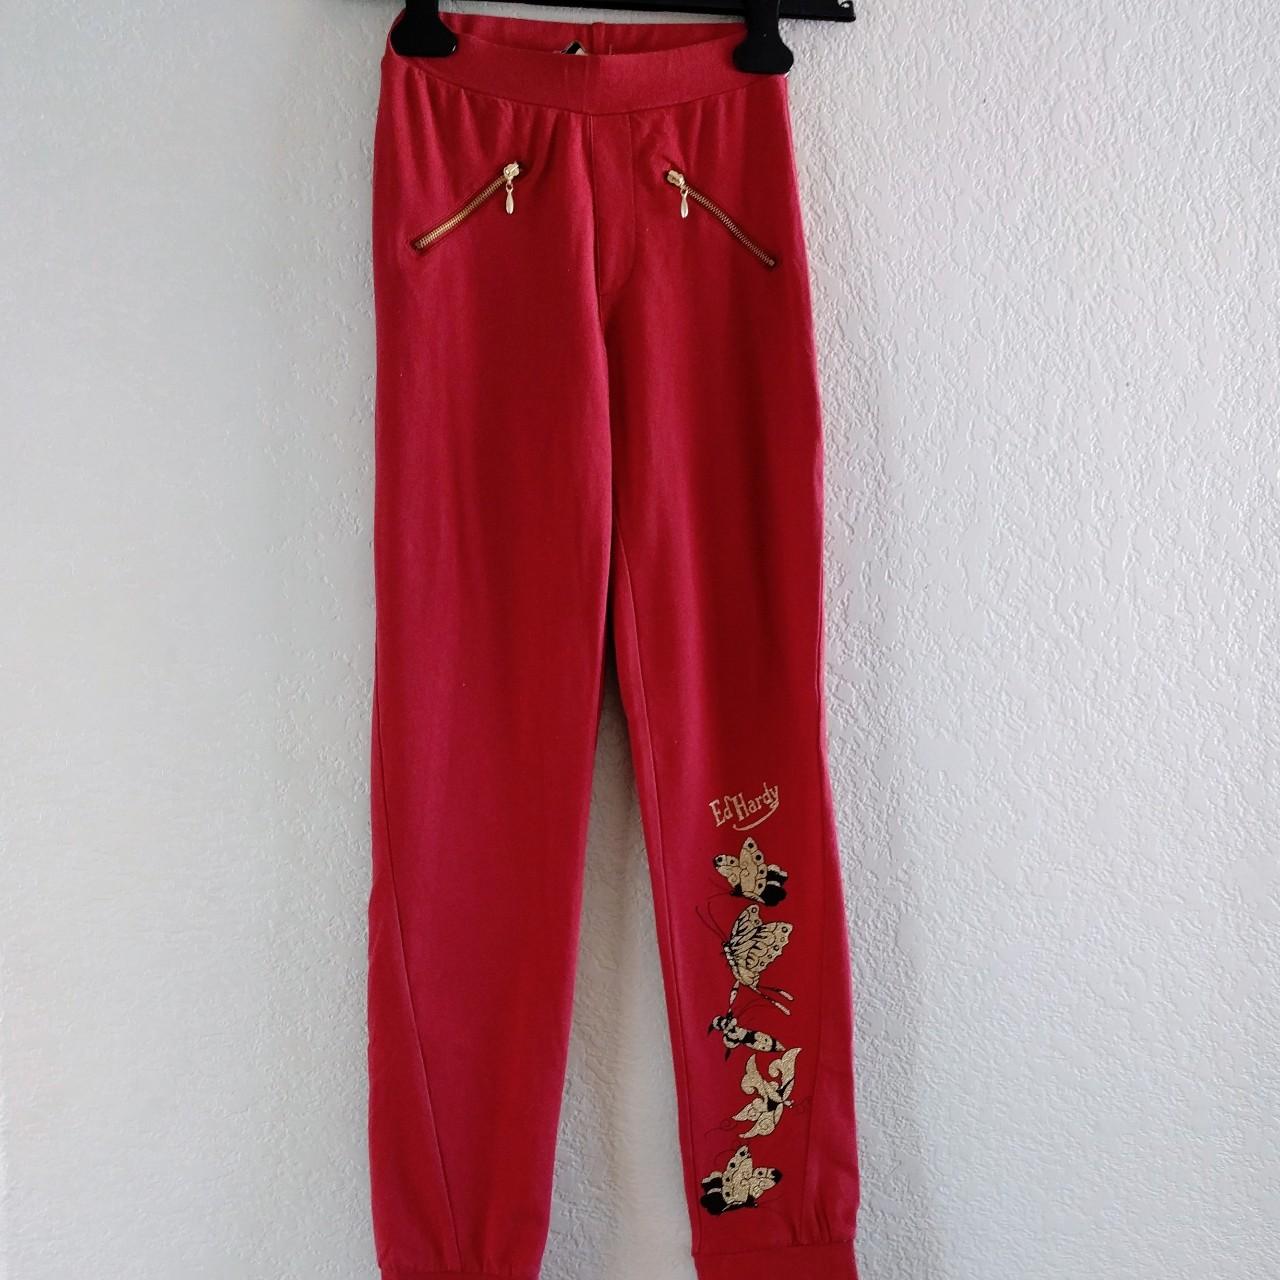 Ed Hardy Balloon Pant | Urban Outfitters Mexico - Clothing, Music, Home &  Accessories